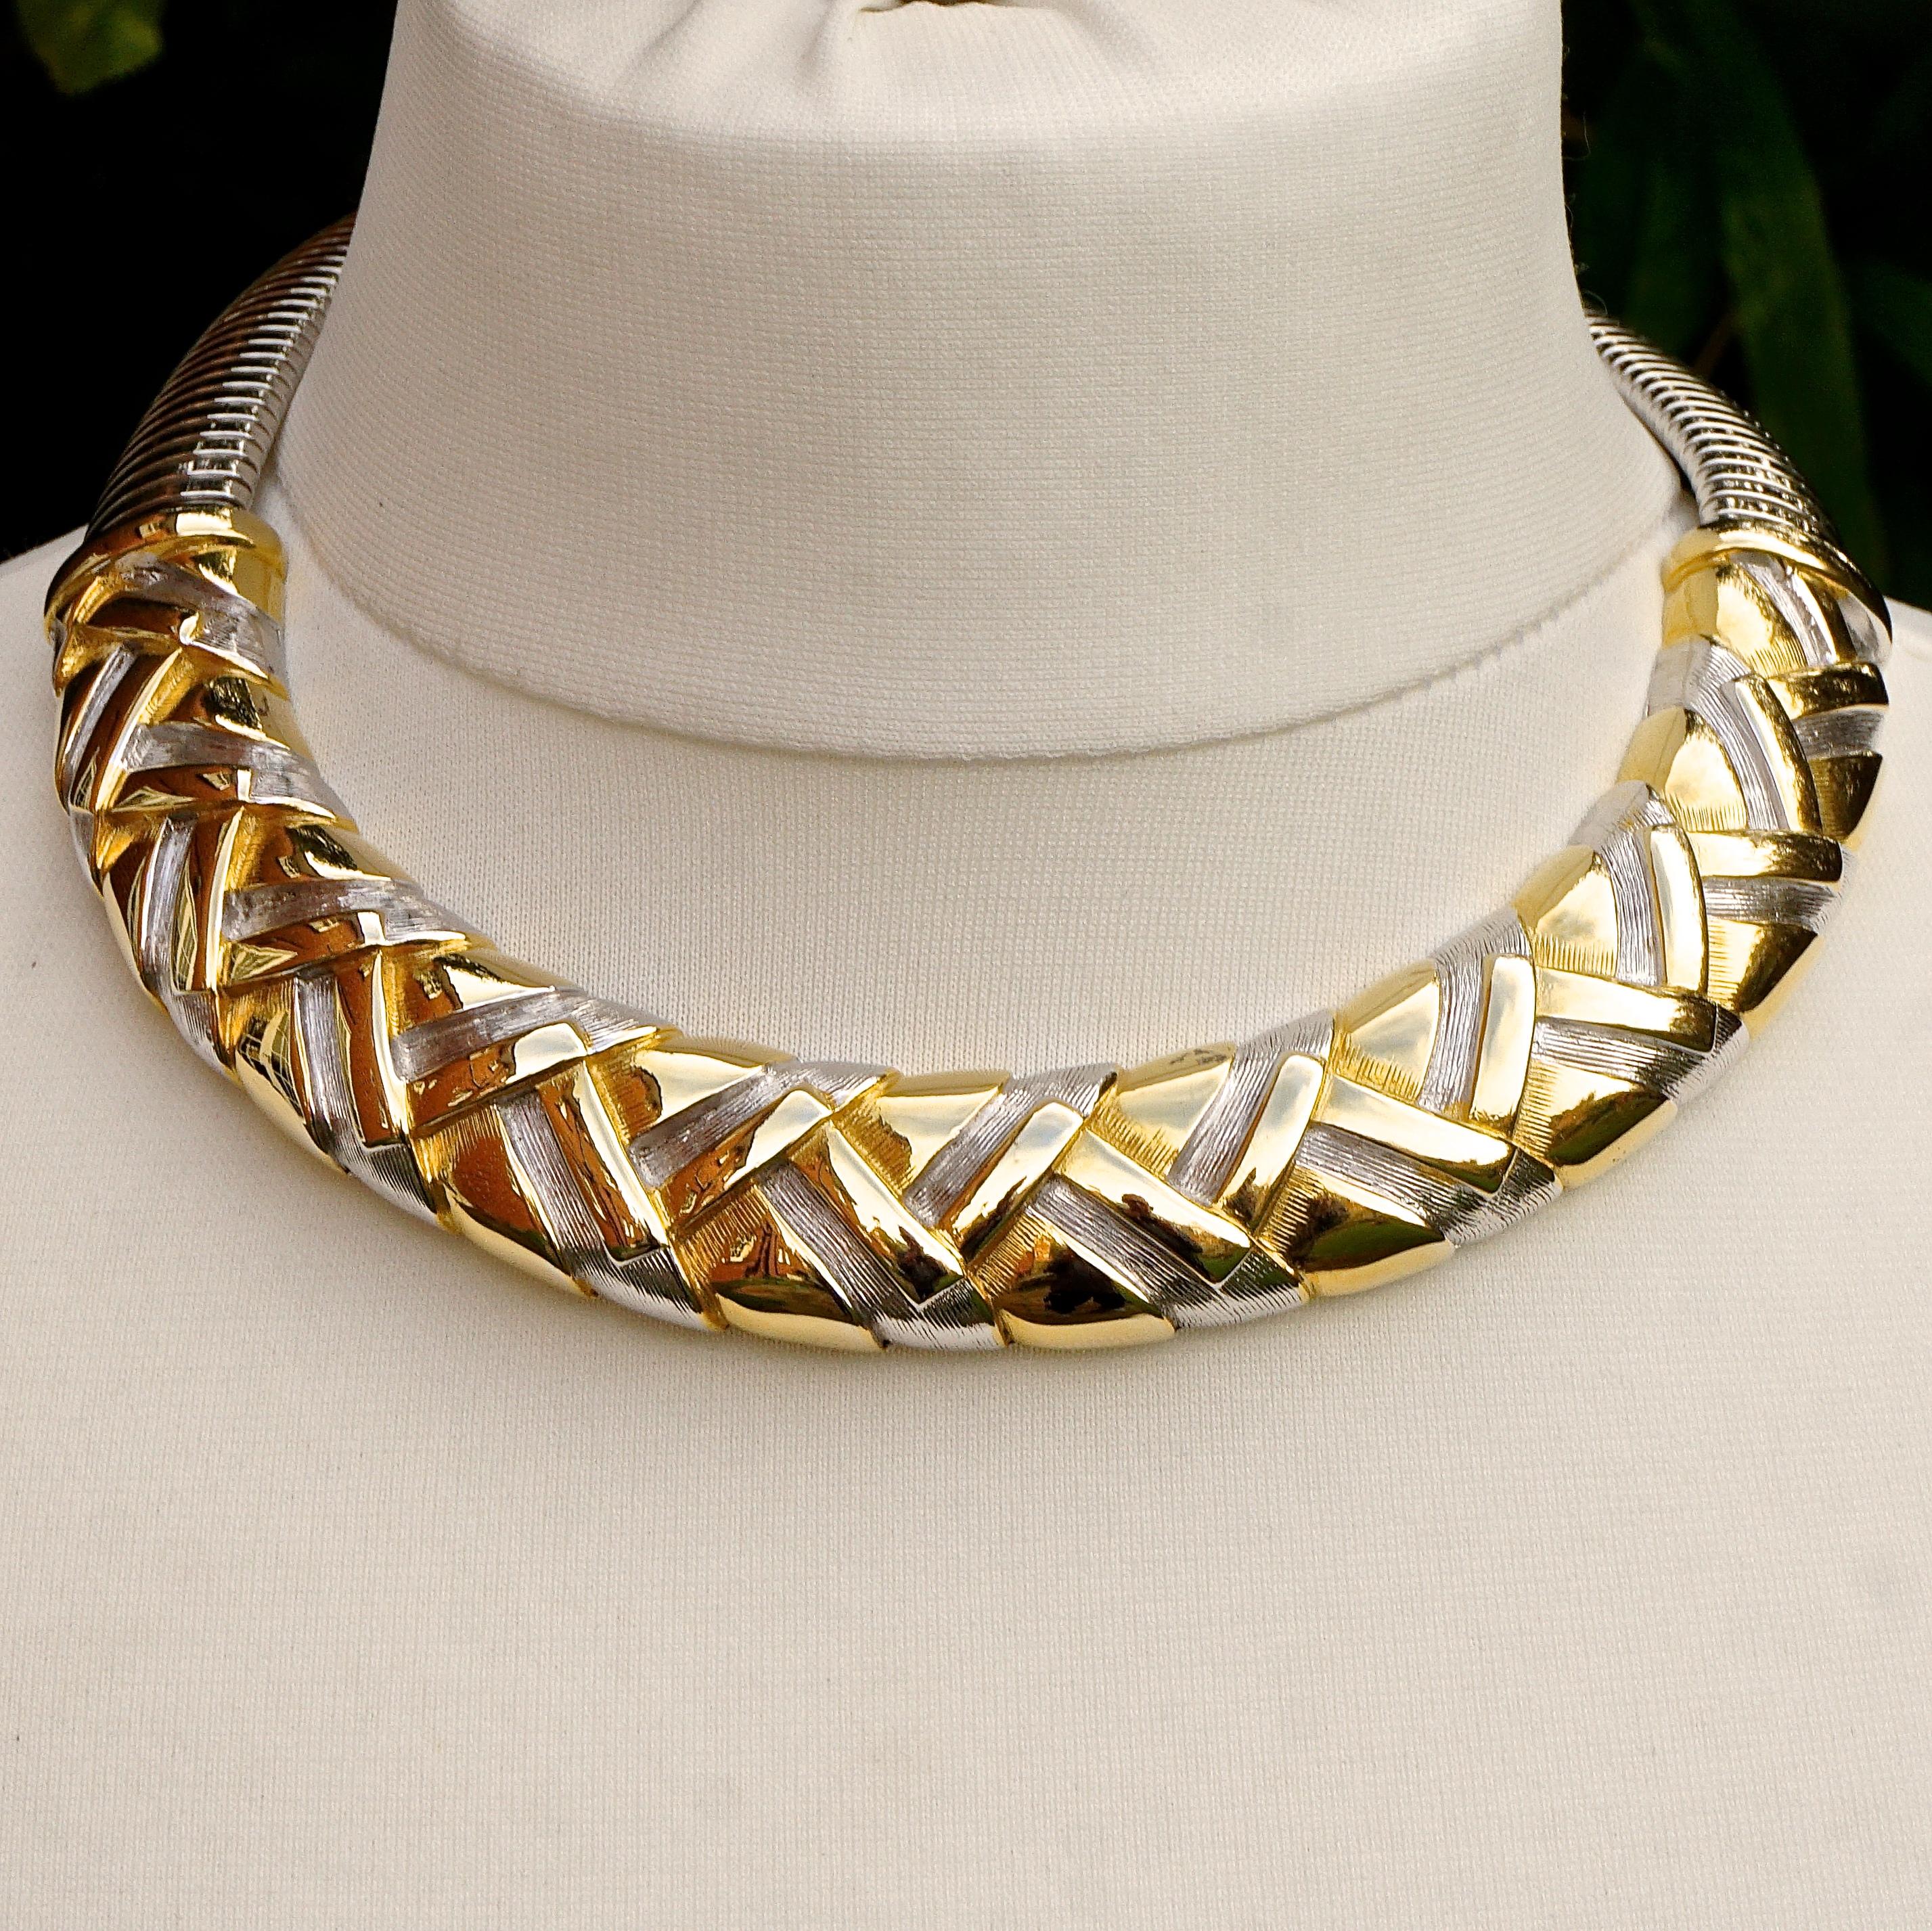 Alexis Kirk Gold Tone and Silver Tone Statement Choker Necklace circa 1980s 5